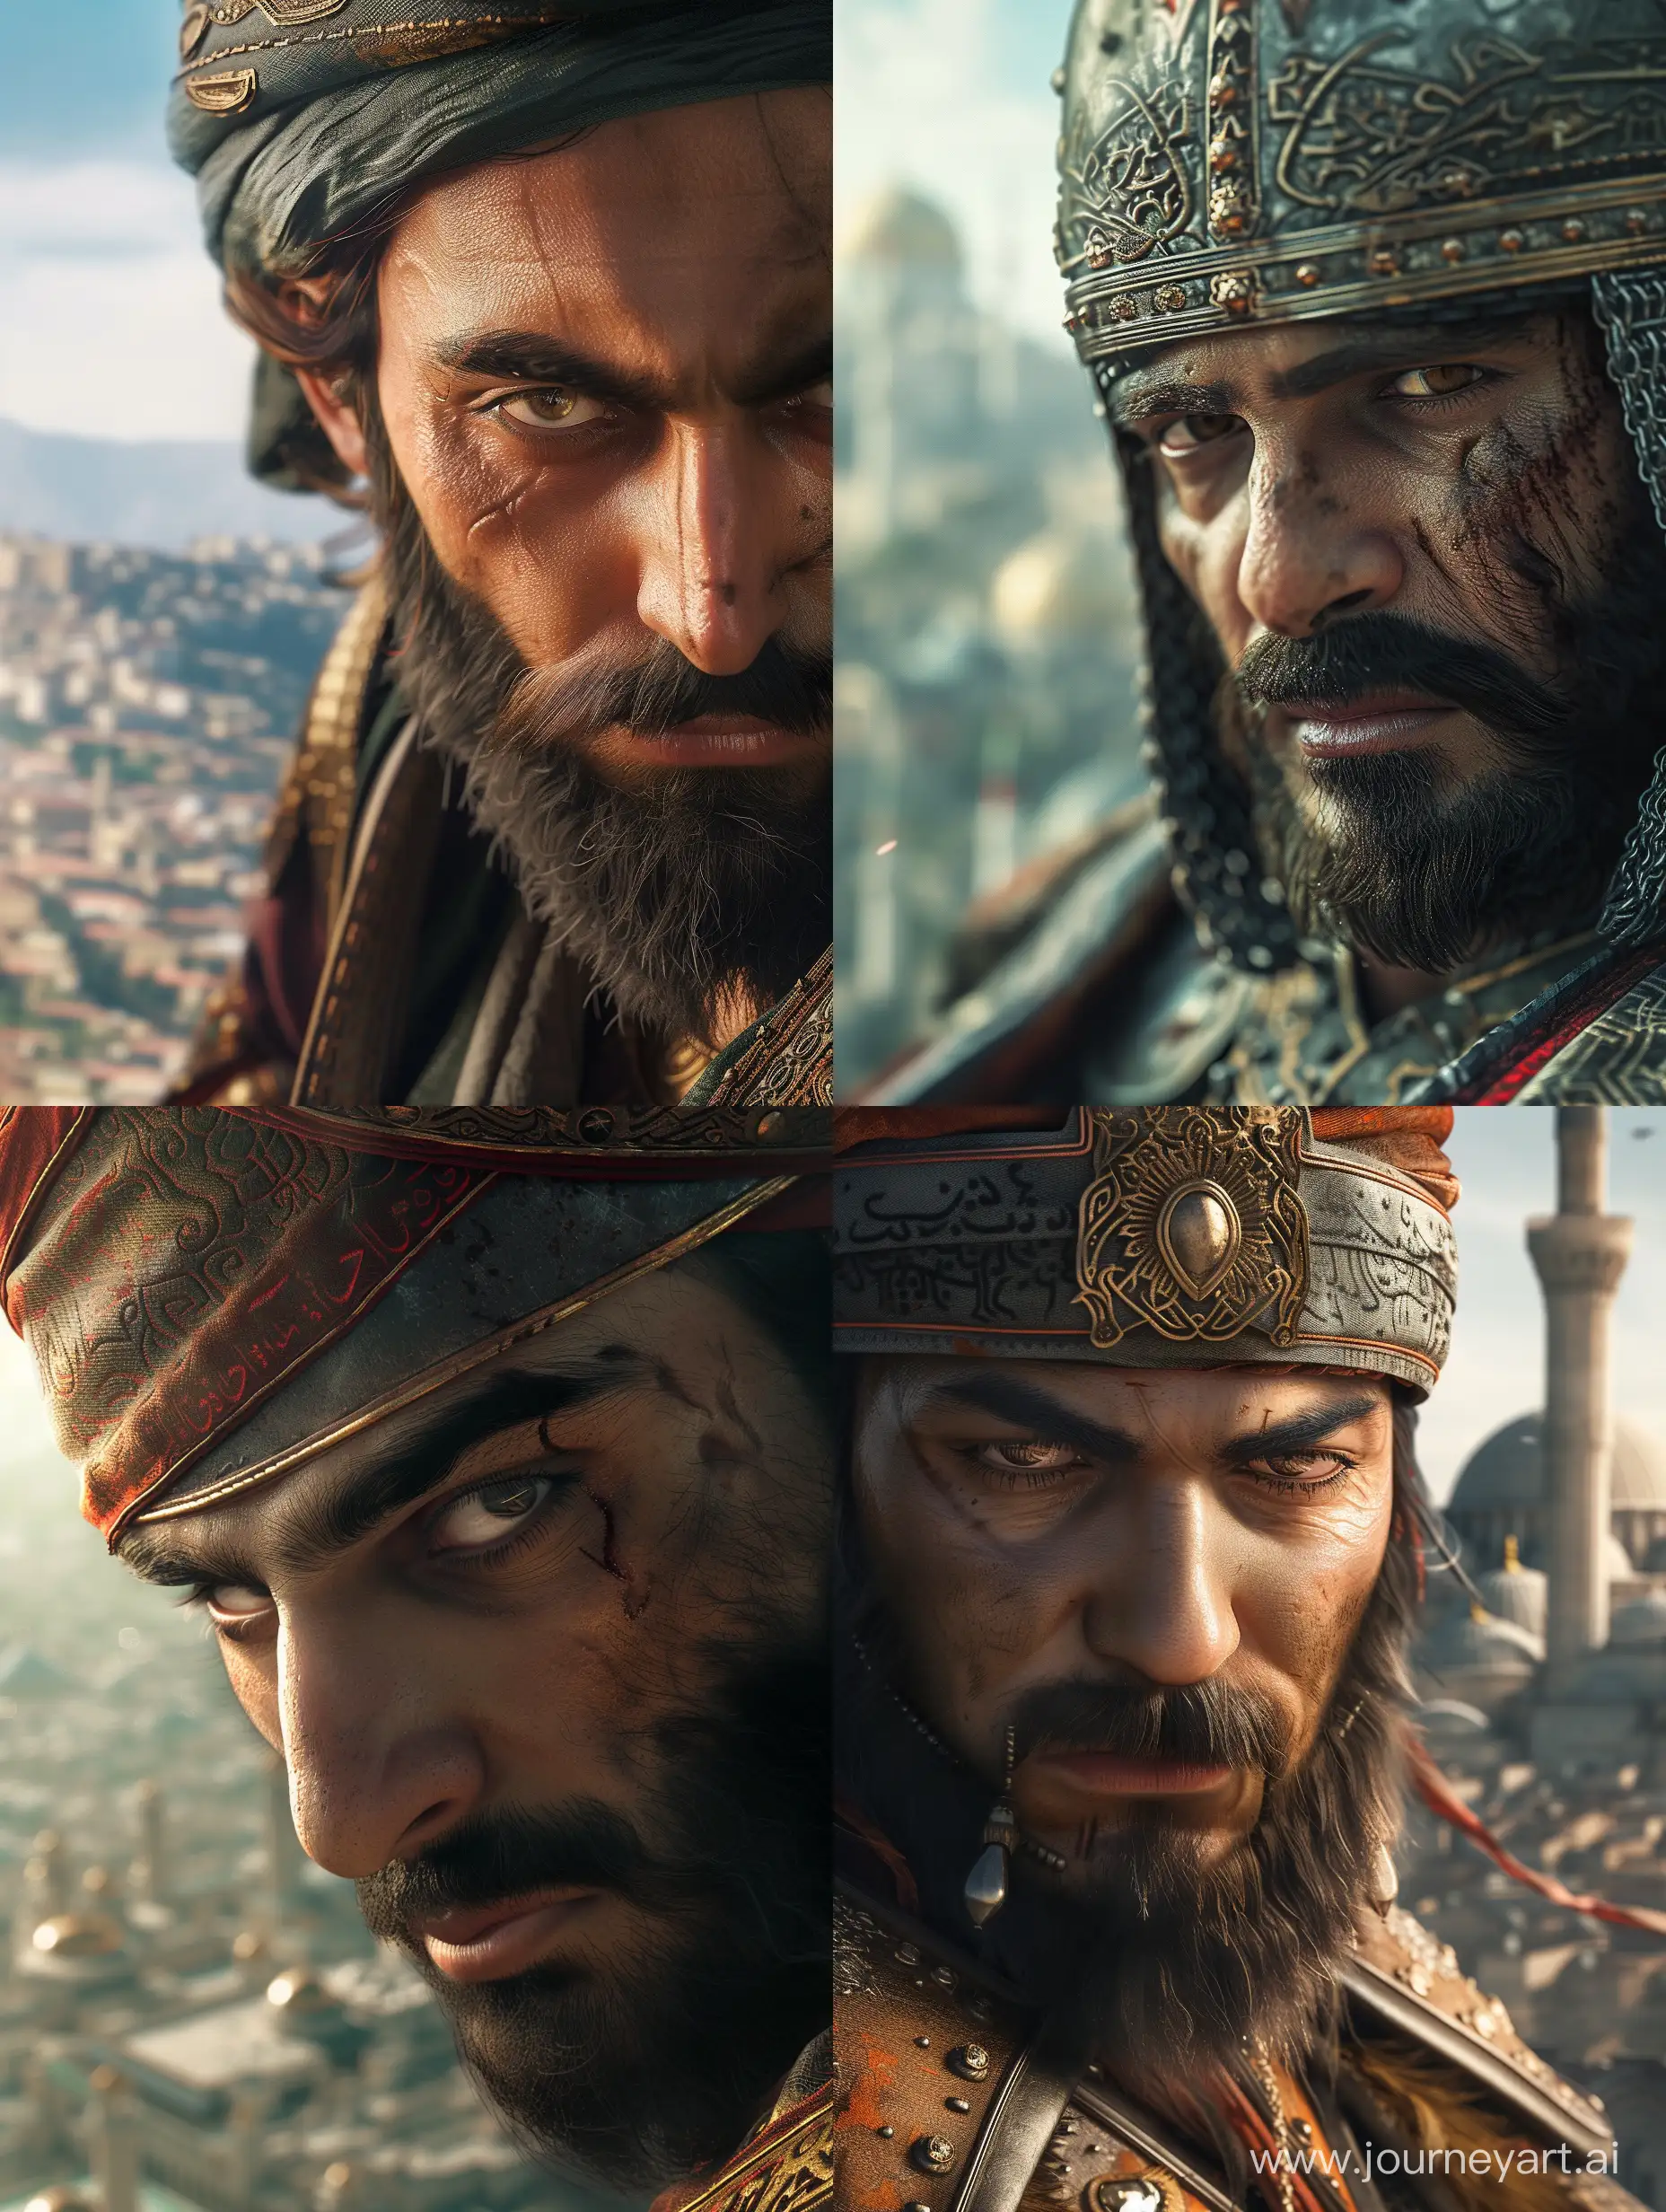 Ottoman-Warrior-in-Detailed-4K-Realism-Cityscape-CloseUp